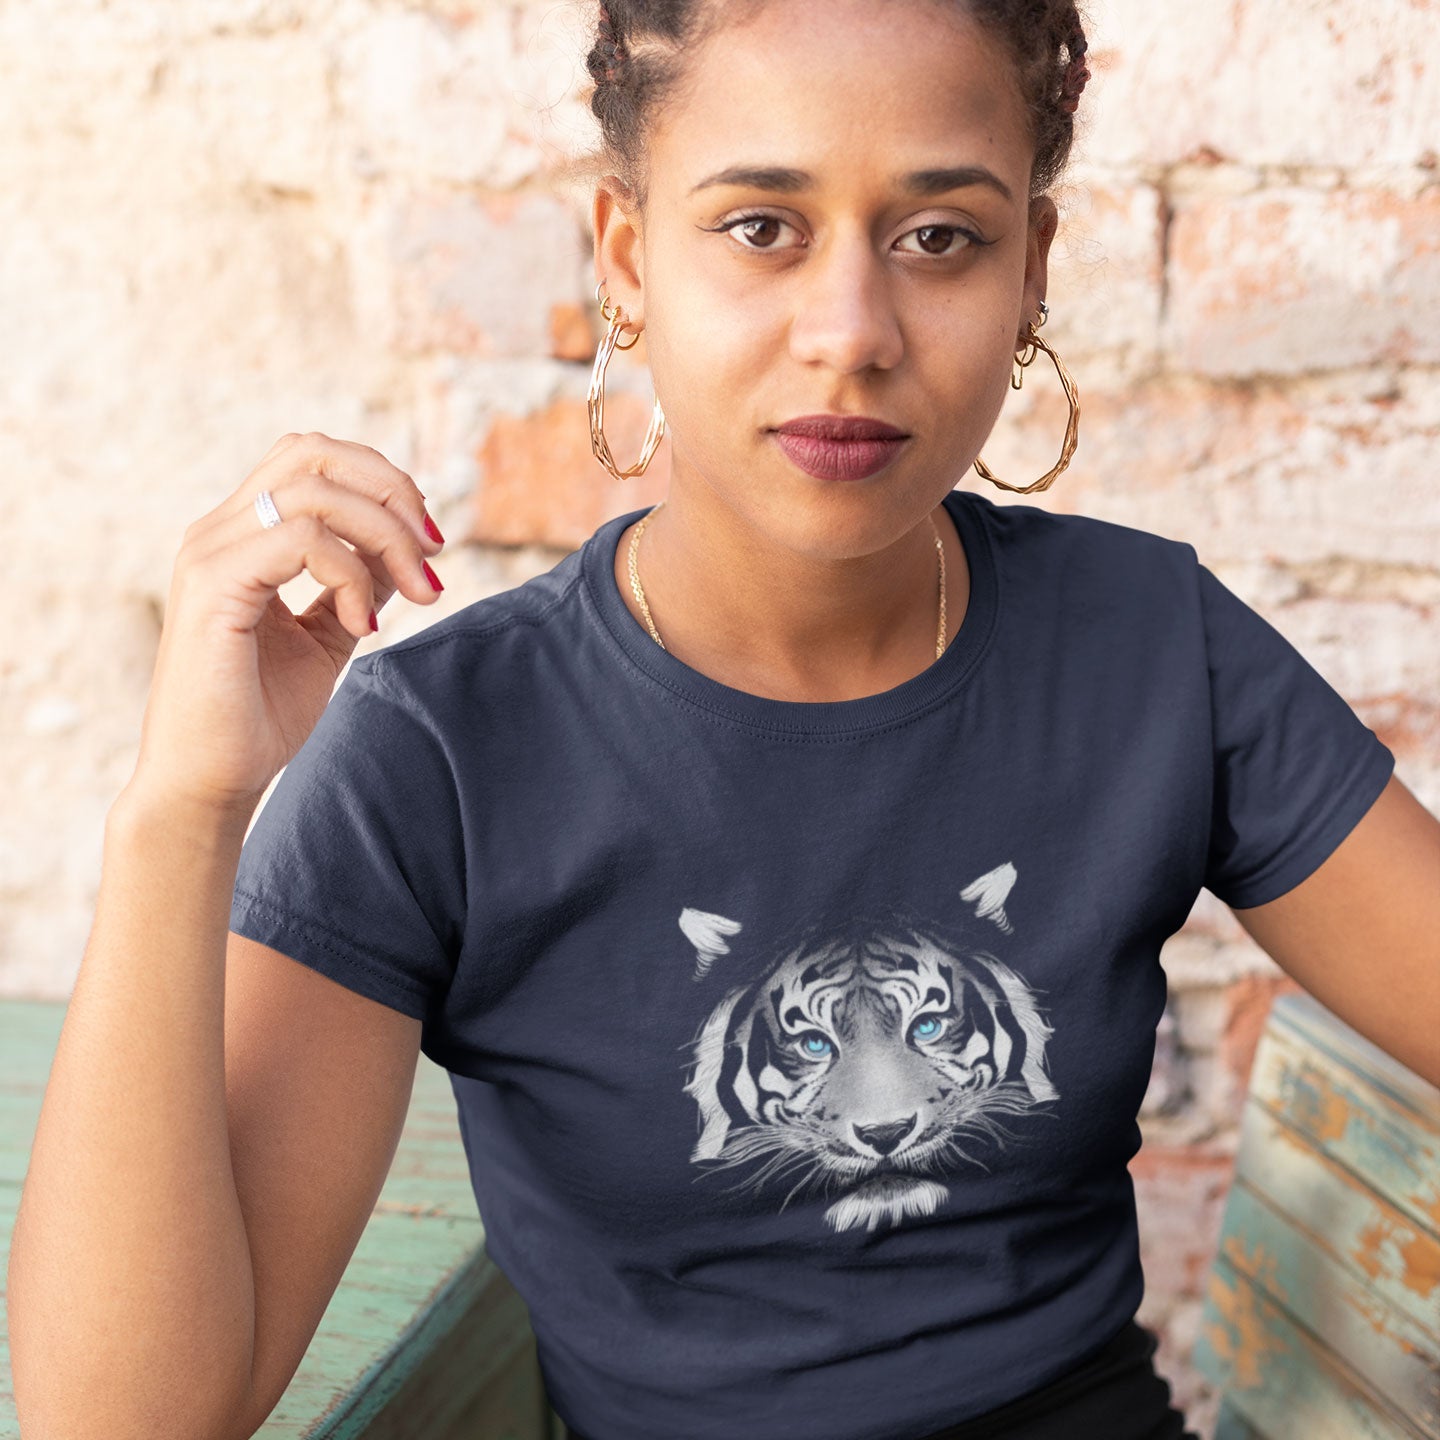 Girl wearing a navy blue t-shirt with a tiger print